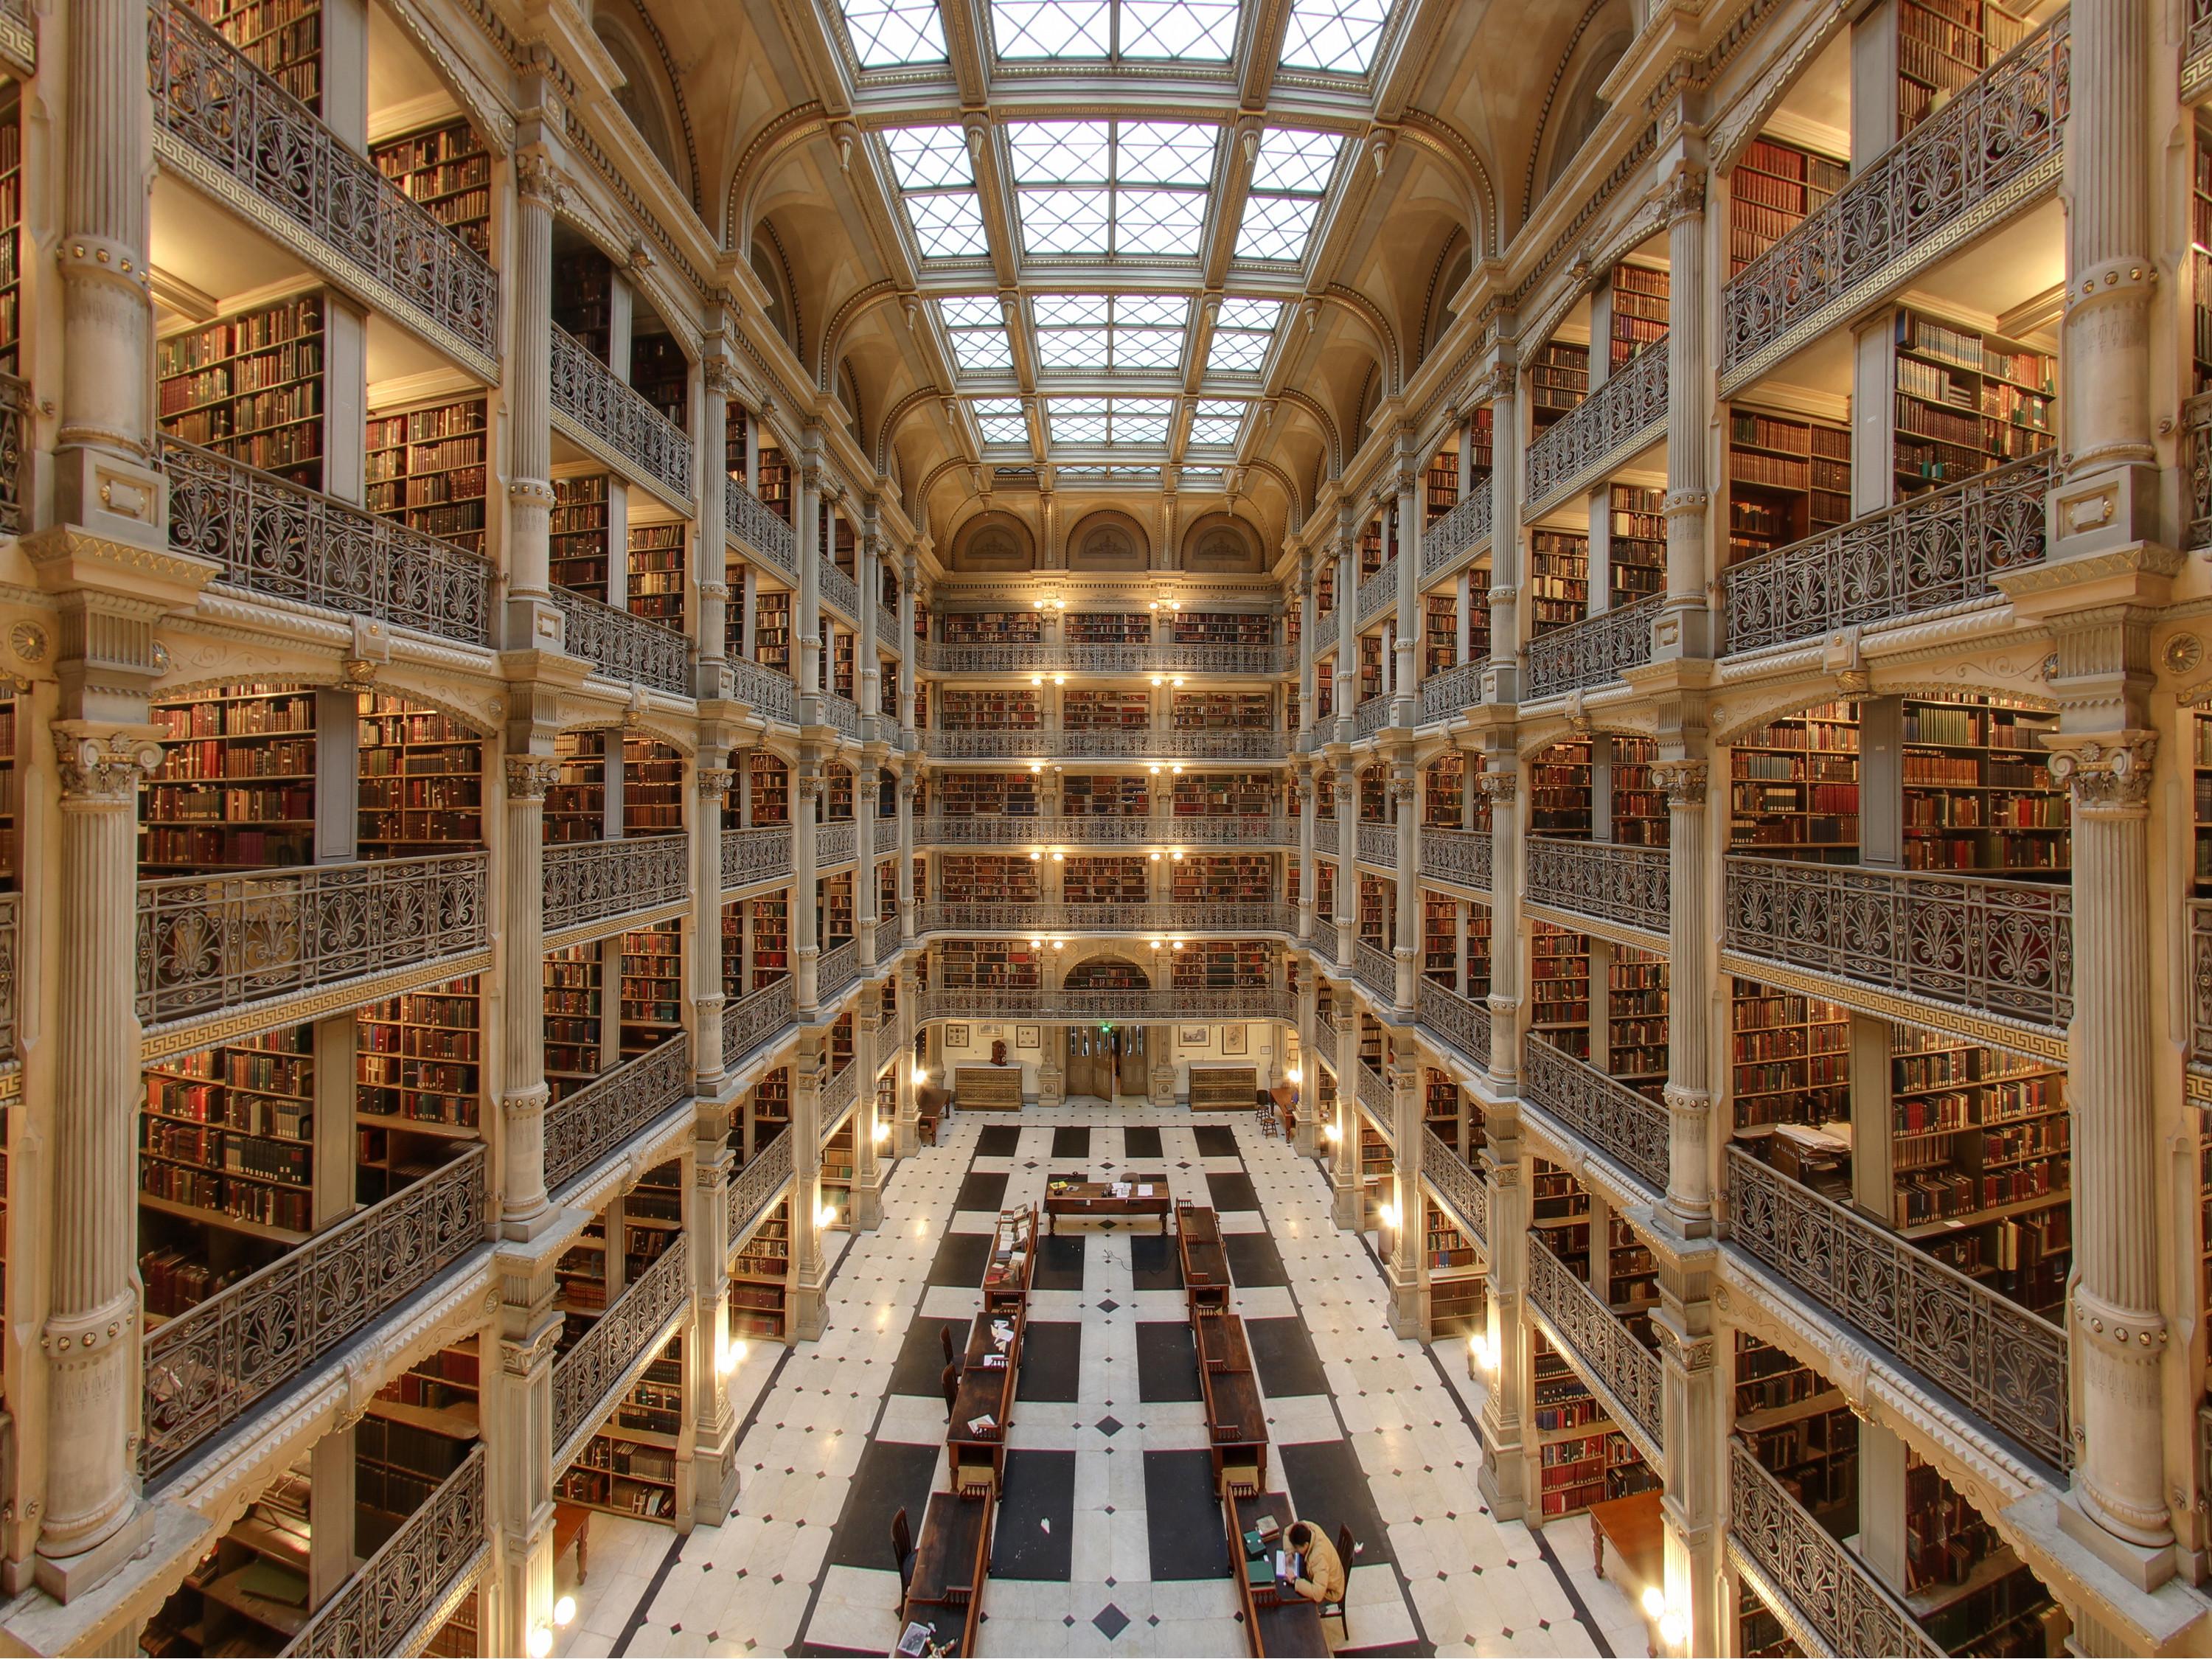 George peabody library - fuente: Wikipedia